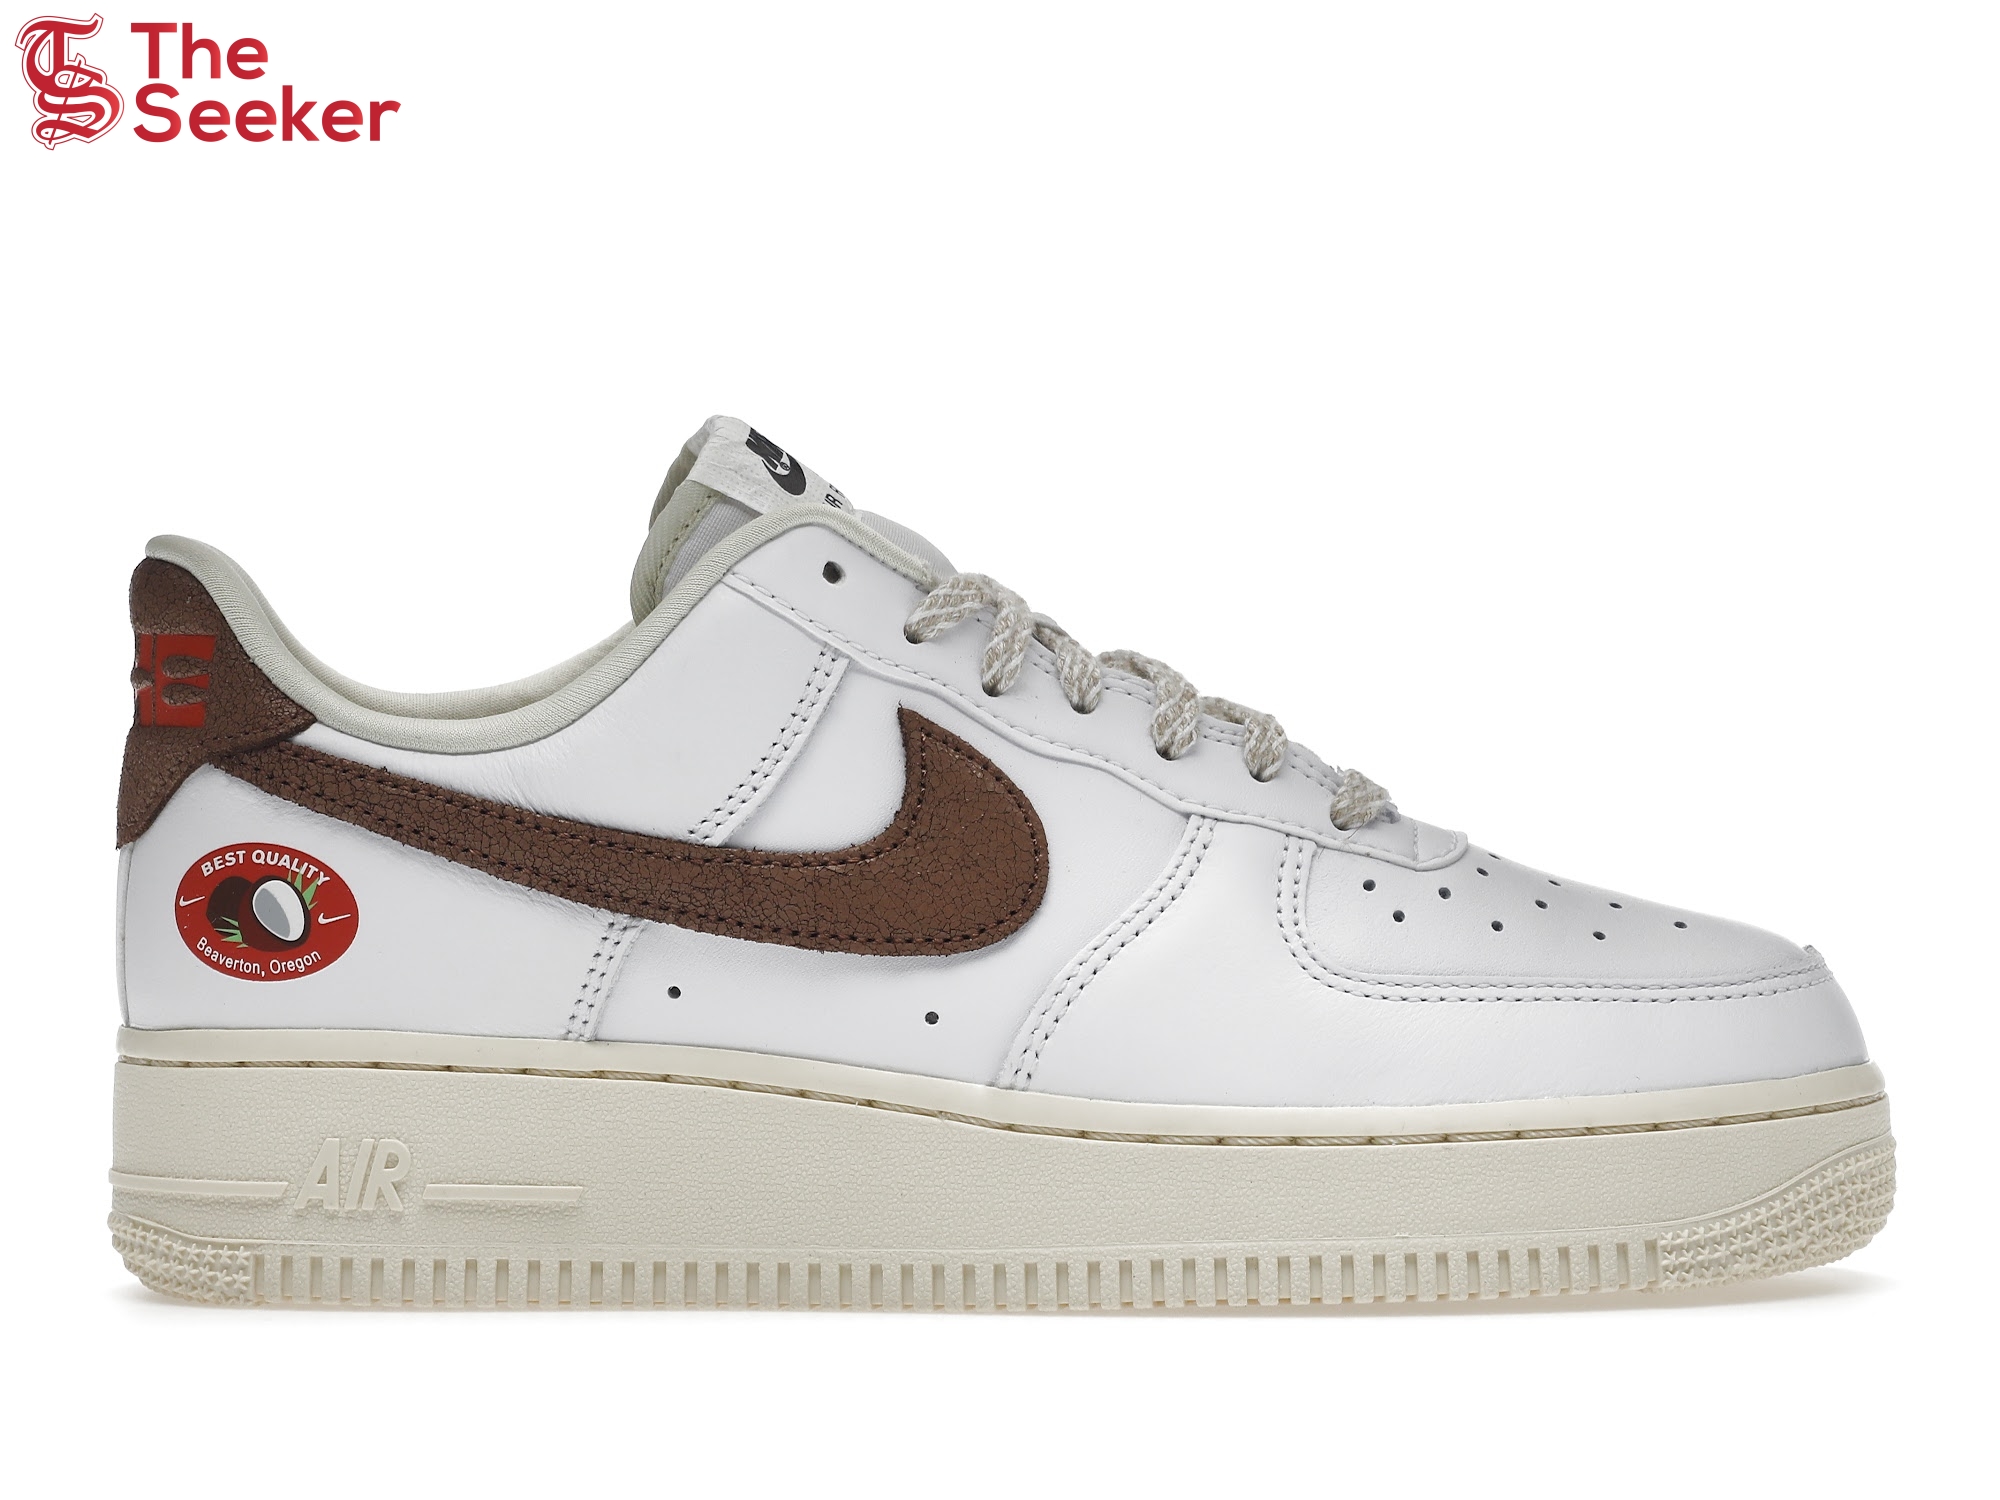 Nike Air Force 1 '07 LX Coconut (Women's)